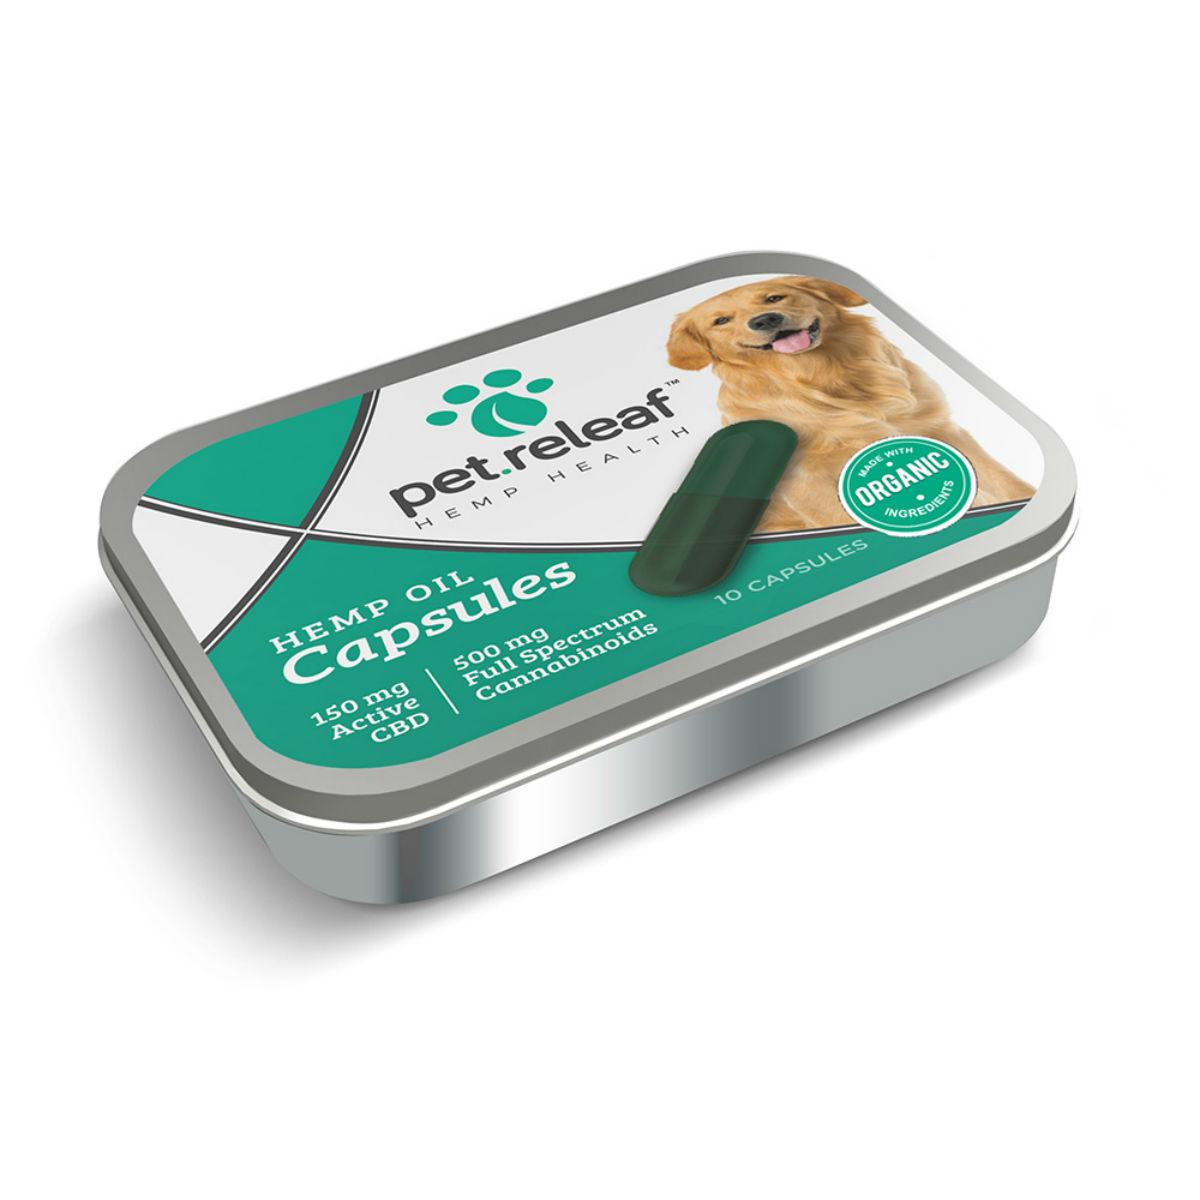 Dog Healthcare products